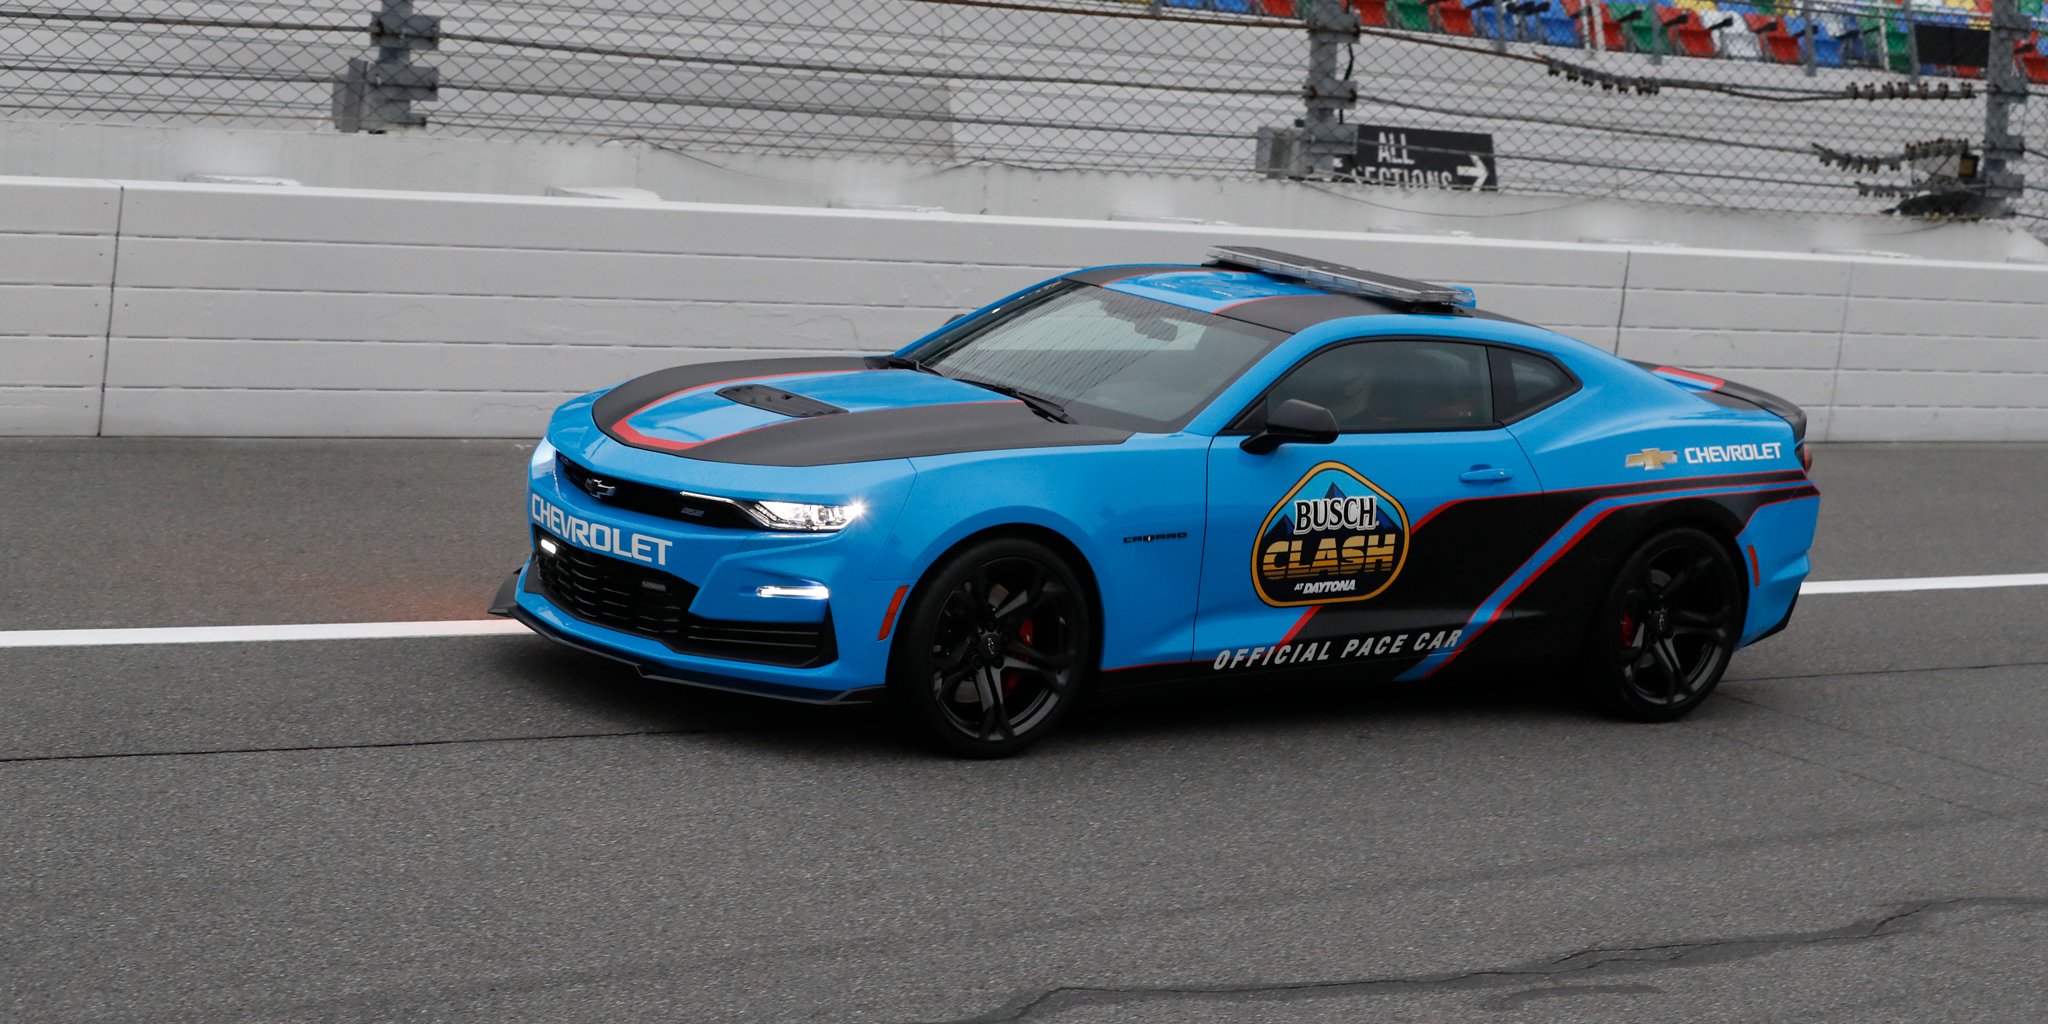 2022 Chevy Camaro Will Lose These Two Paint Colors